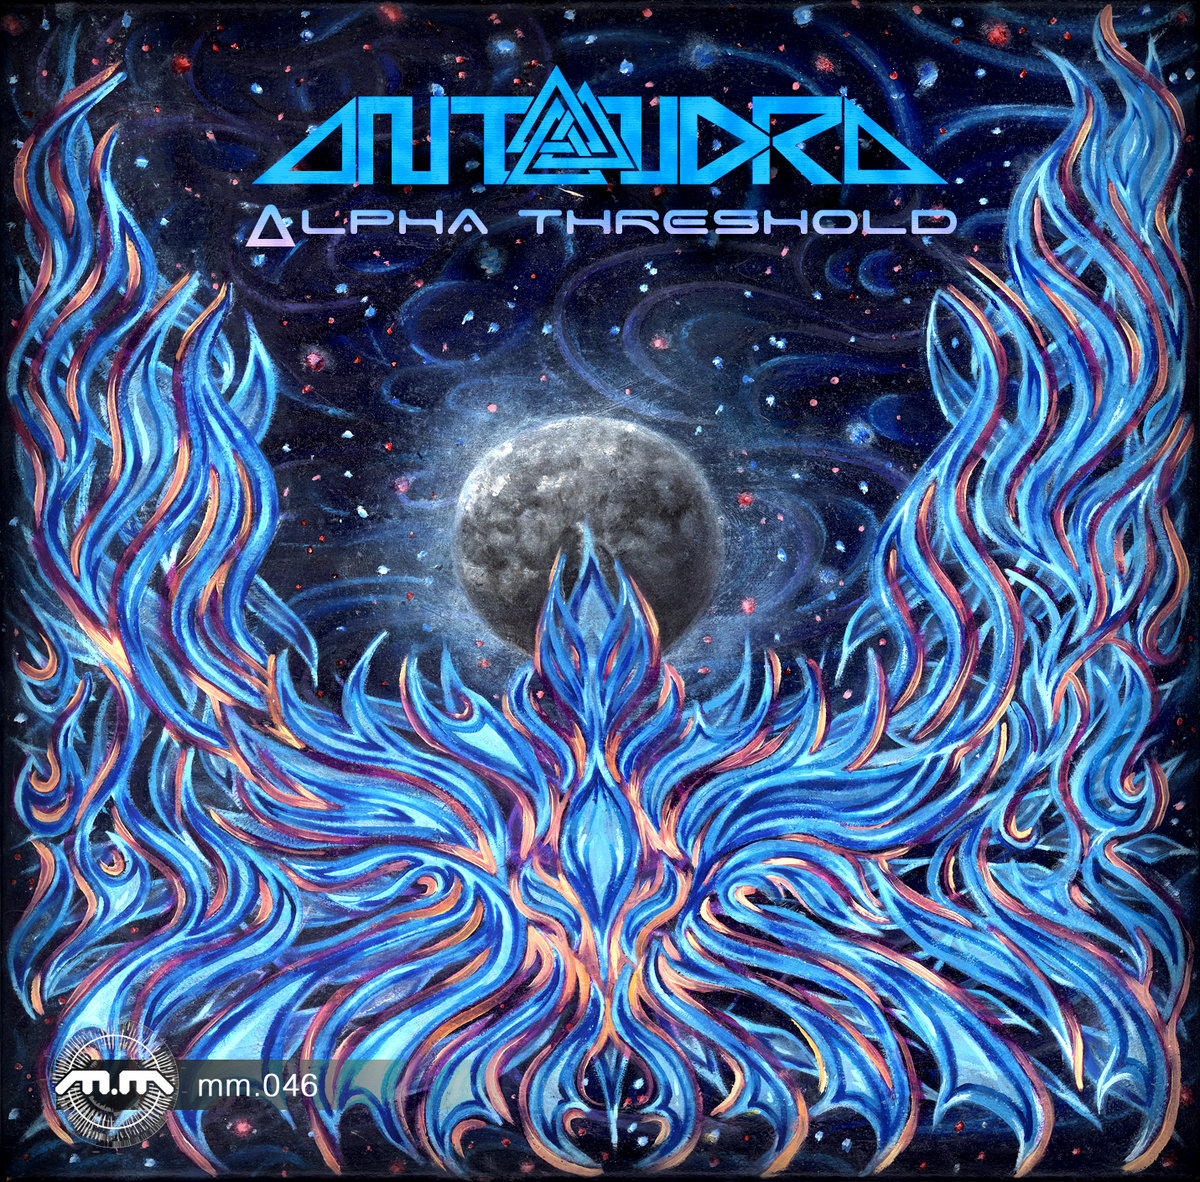 Antandra - Grows in Still Water @ 'Alpha Threshold' album (ambient, downtempo)